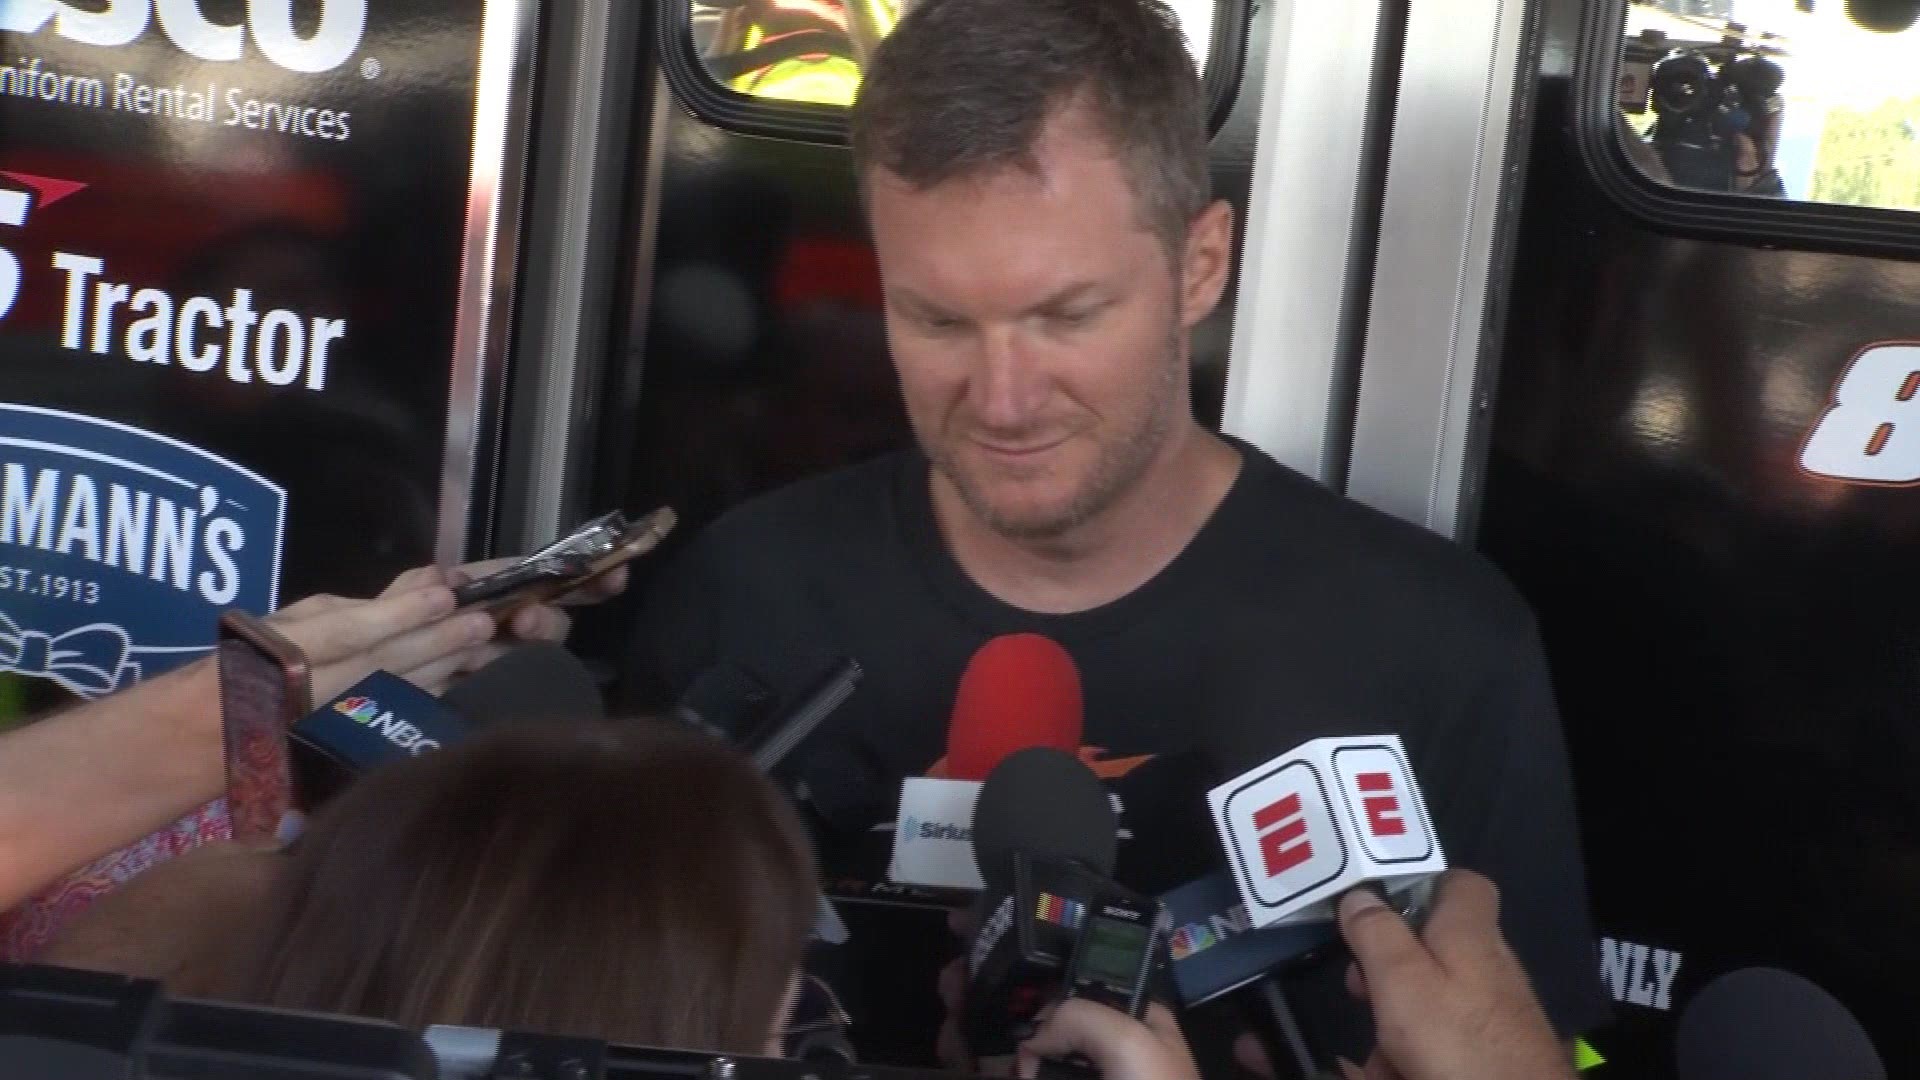 Just two weeks after his plane crash, Dale Earnhardt Jr. gets ready to take on Darlington's raceway for NASCAR's Labor Day throwback weekend. Both Earnhardt Jr.'s wife Amy and 1-year-old daughter Isla will watch his annual race after two weeks of taking some time to recover from a traumatic plane crash. Earnhardt Jr. said he is blessed and lucky to be able to carry on with the rest of their lives and continue with racing.